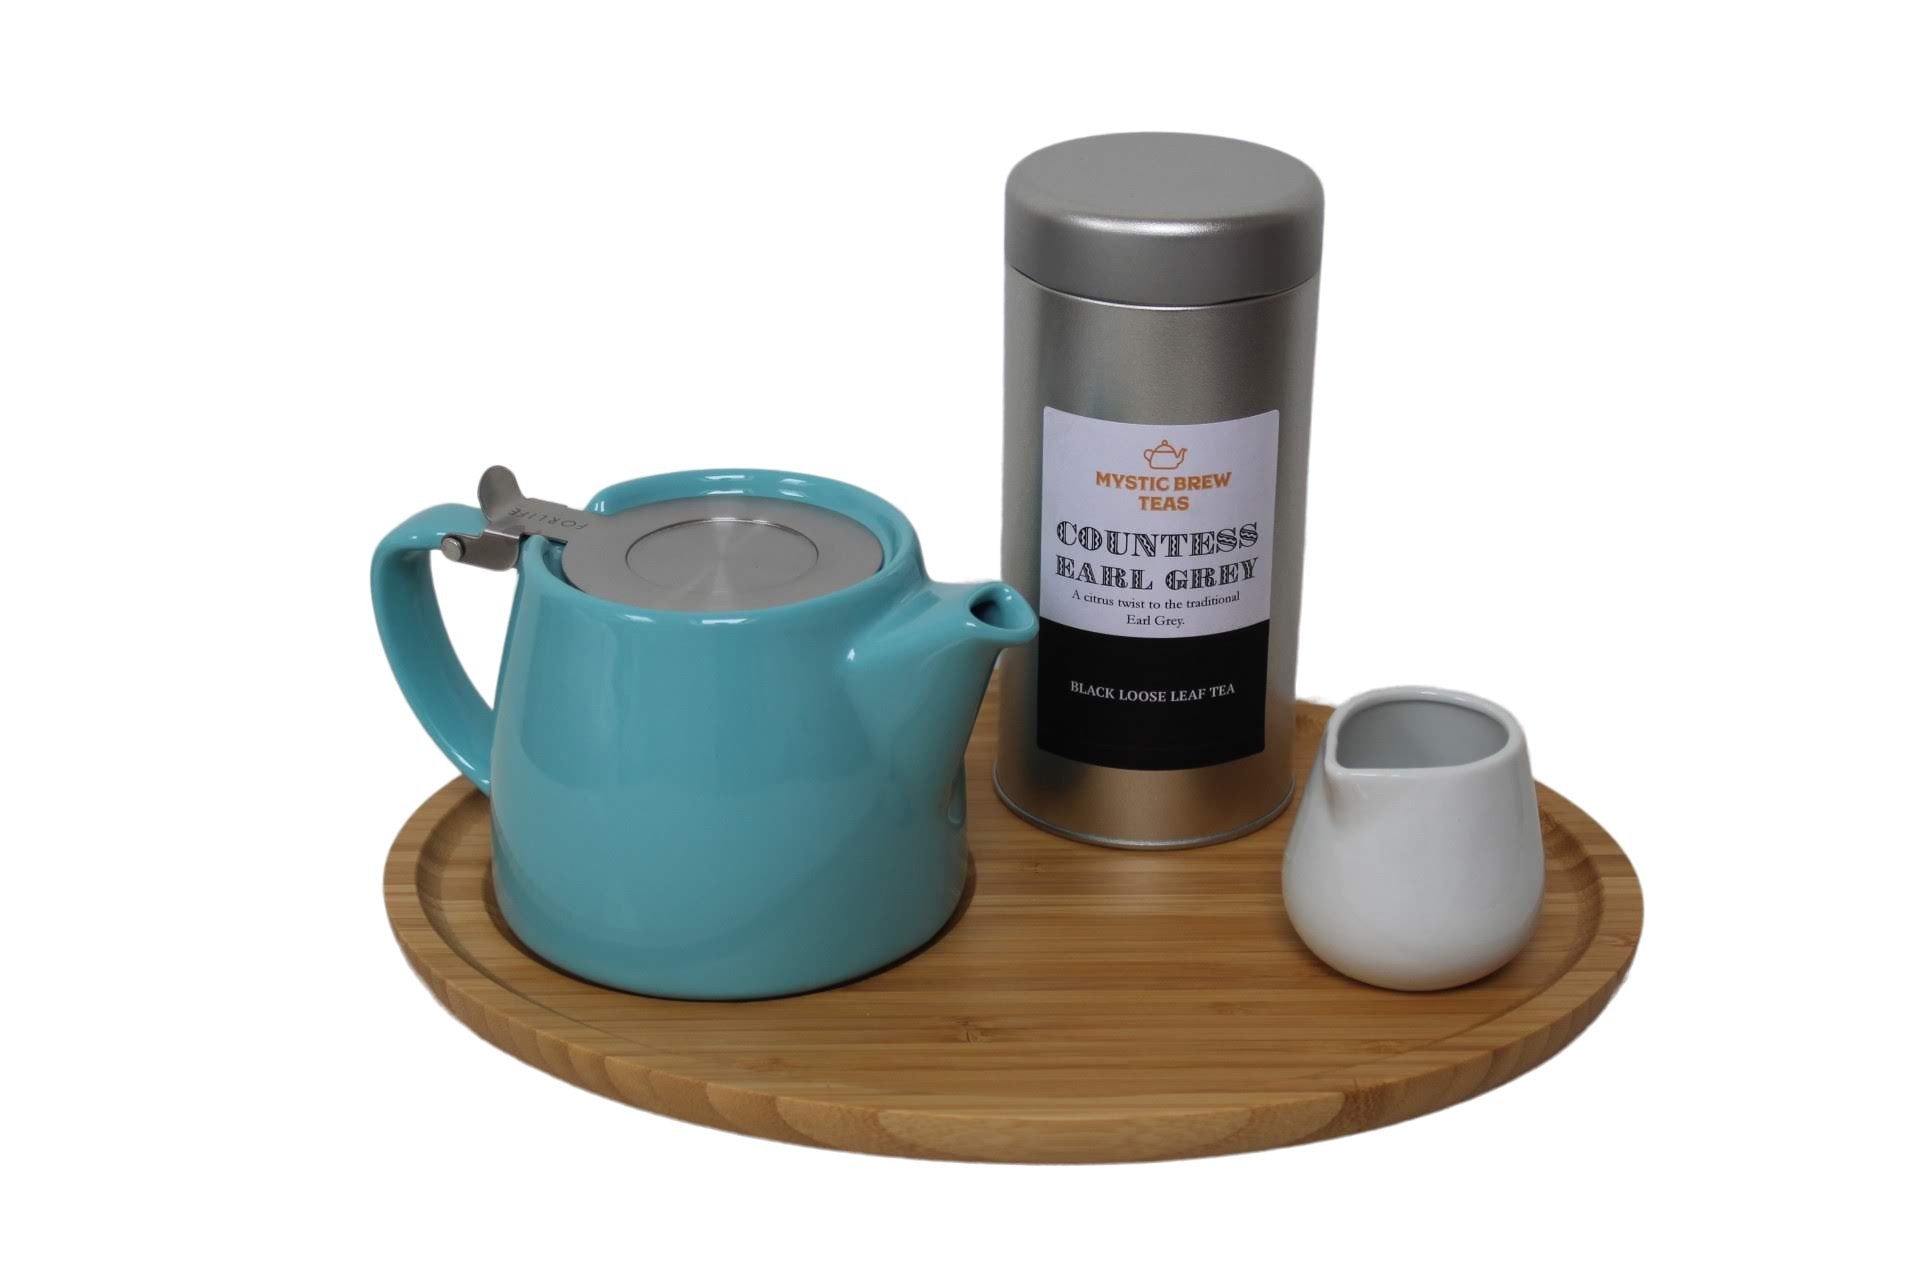 Forlife Teapot Turquoise, Bamboo Tray, Creamer & Countess Earl Grey 100g Caddy - Mystic Brew Teas